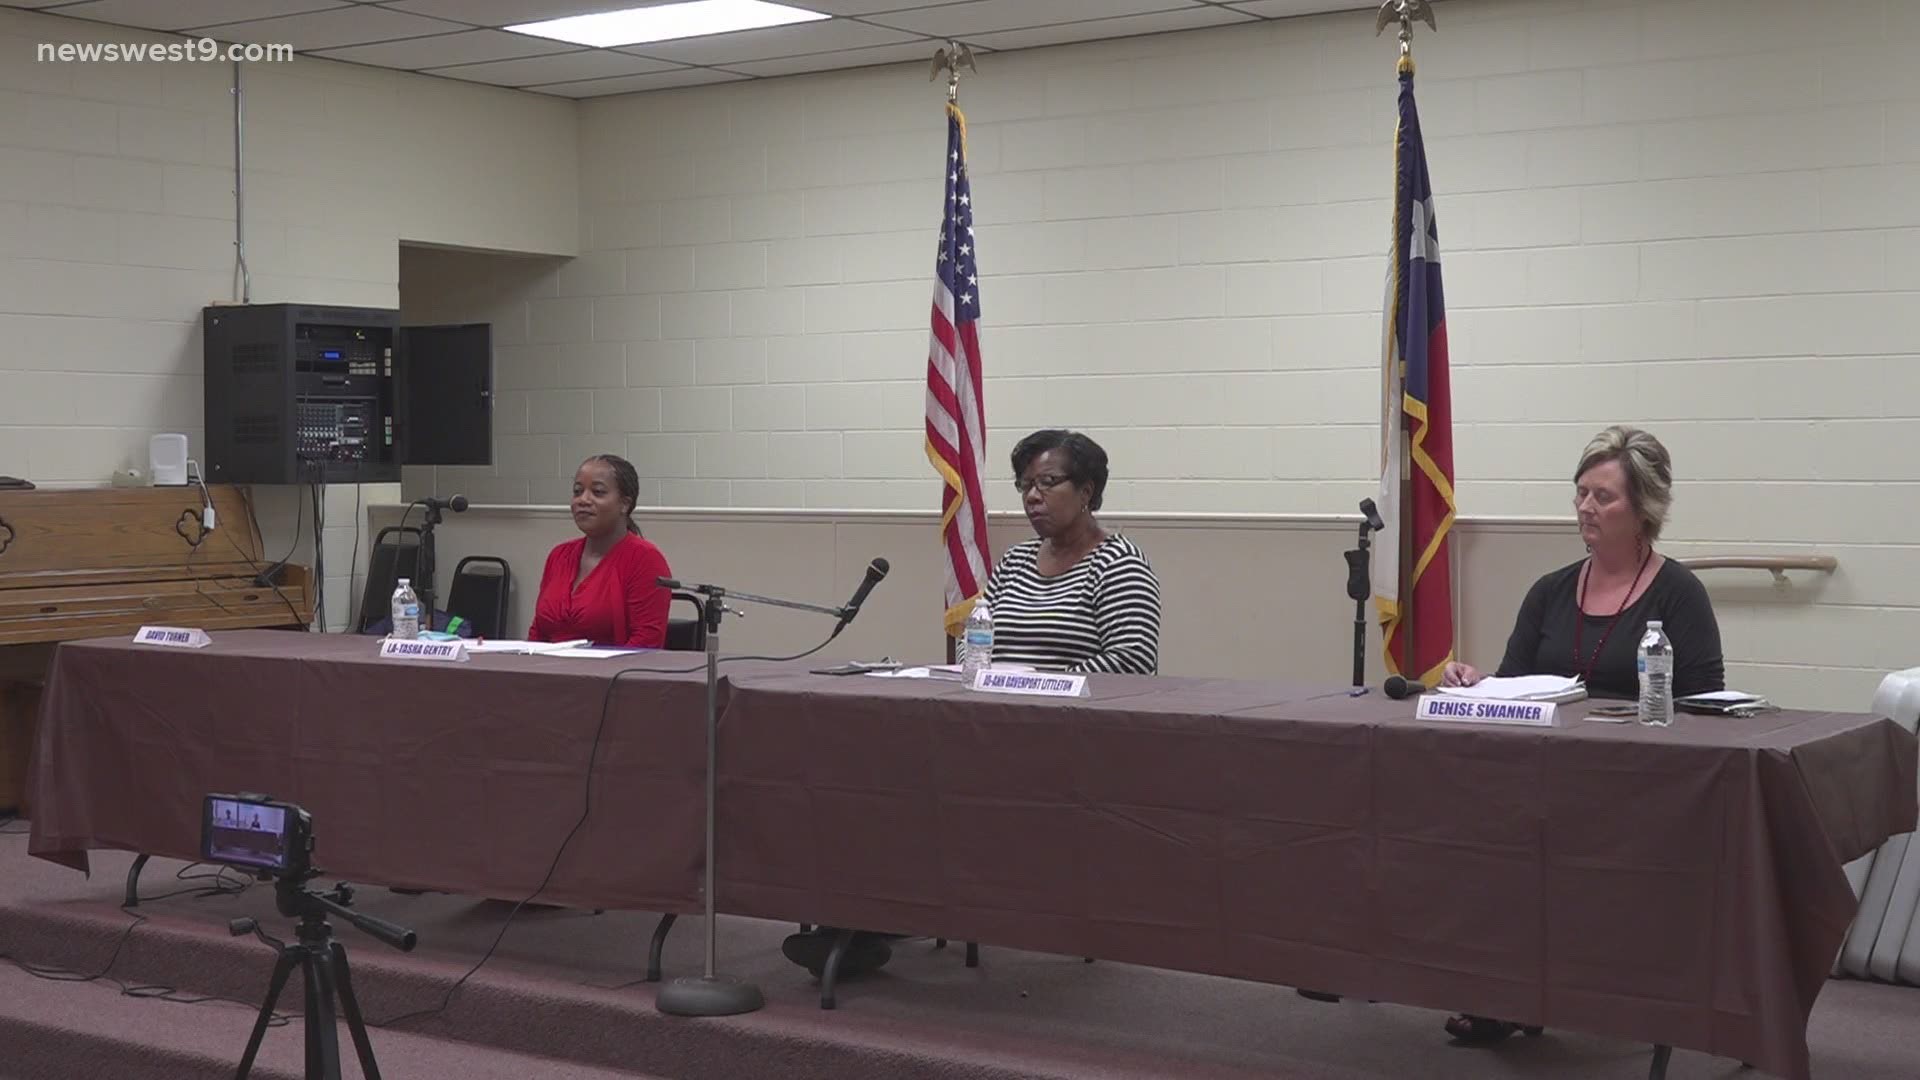 Three of the four candidates spoke at the Northside Senior Center in Odessa.